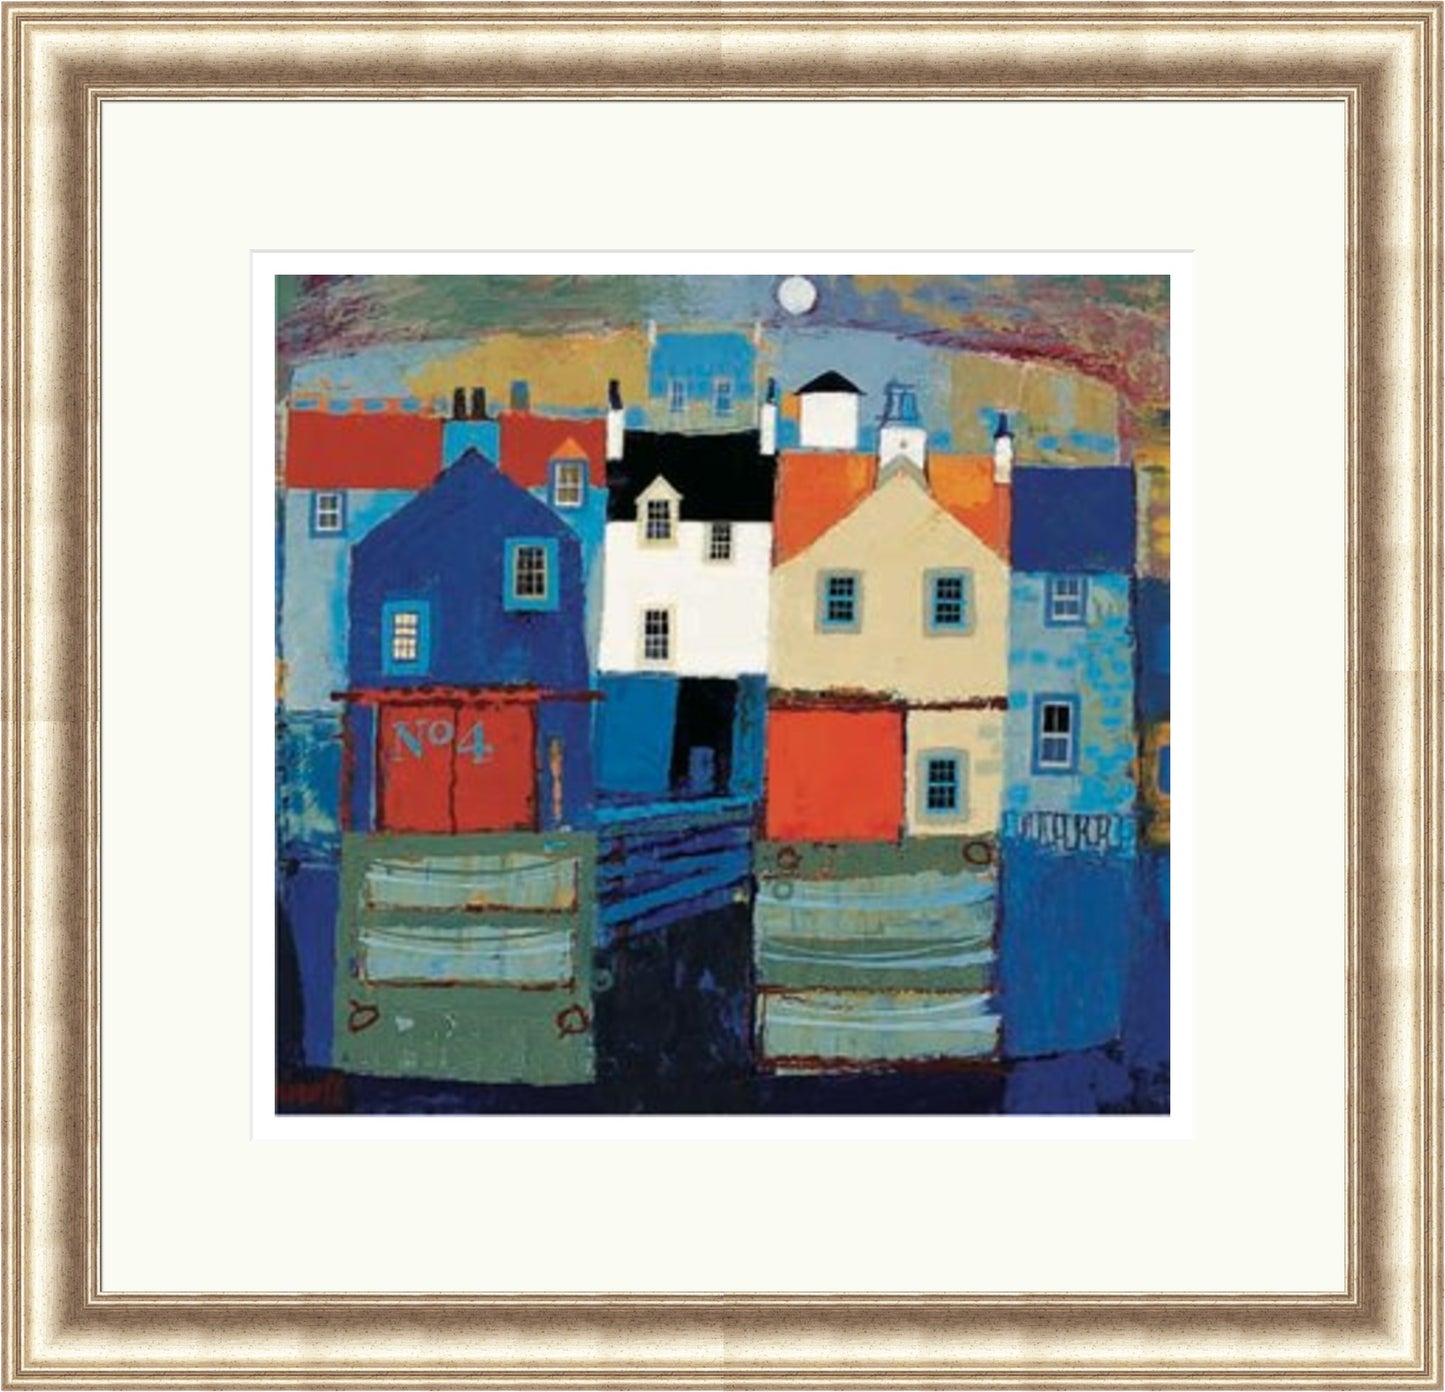 Seatown (Limited Edition) by George Birrell